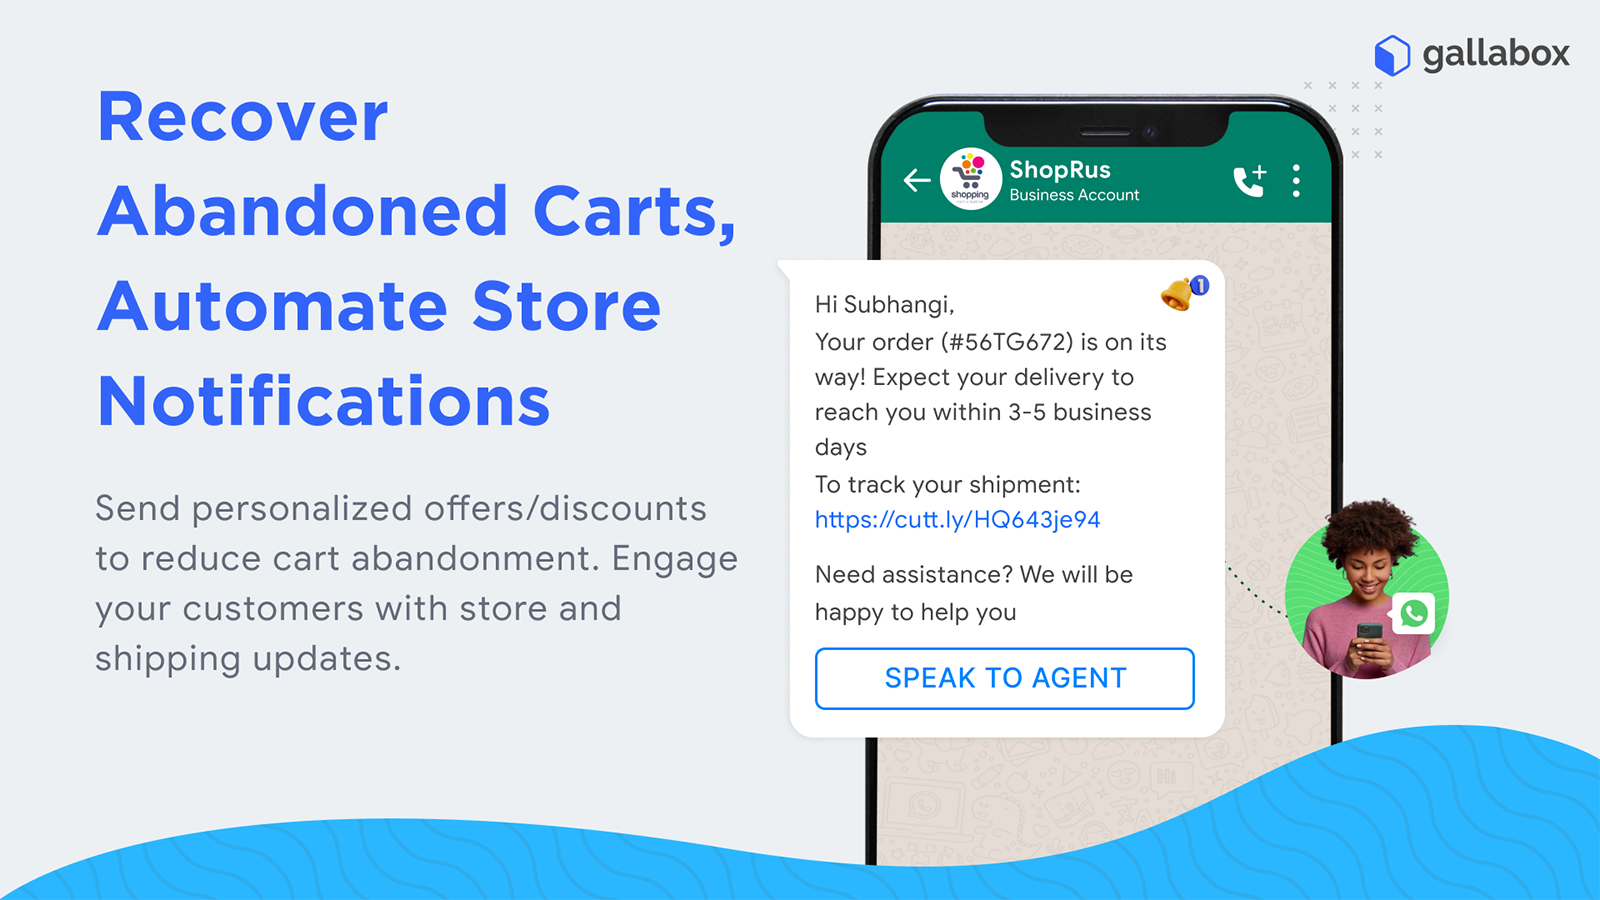 Recover Abandoned Carts, Automate Store Notifications